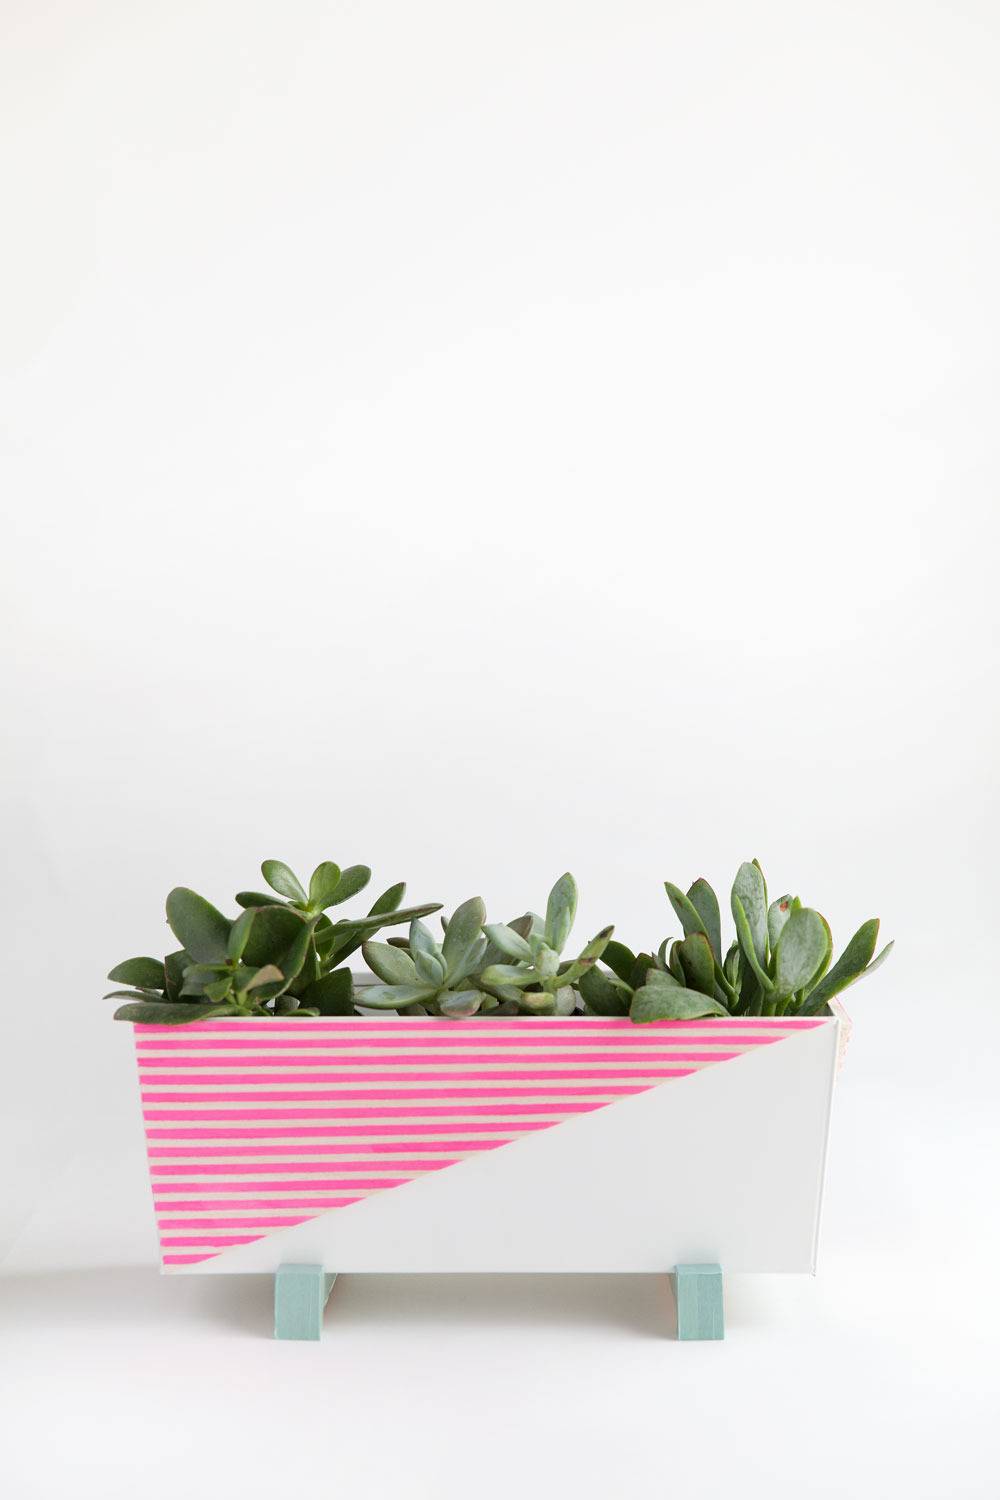 Pink stripes form a triangle on a white rectangular planter with succulents.